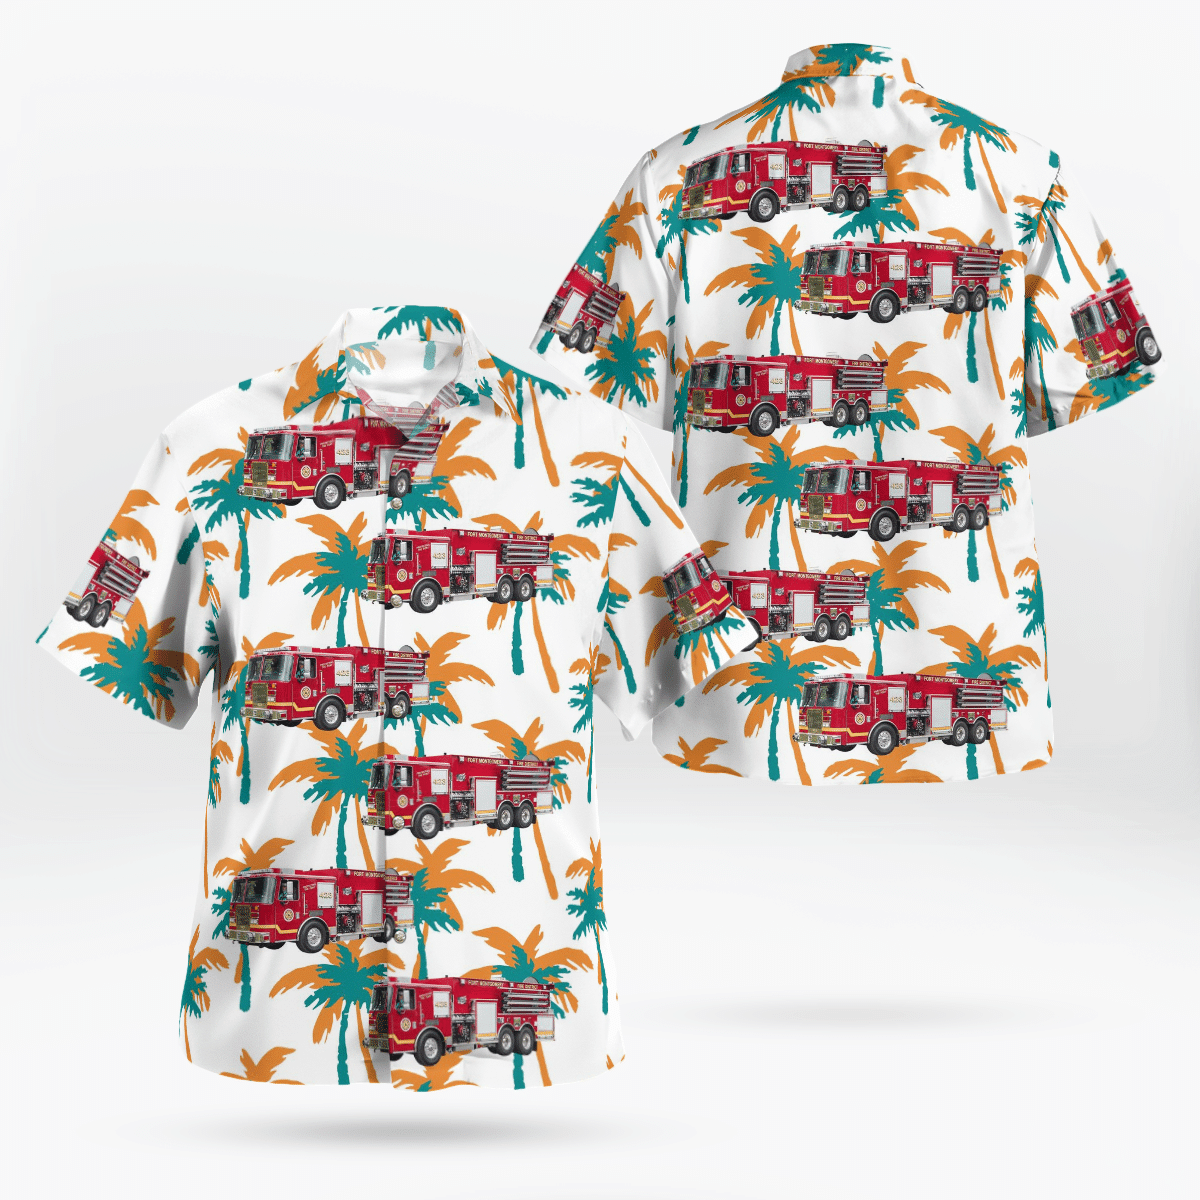 If you want to be noticed, wear These Trendy Hawaiian Shirt 100